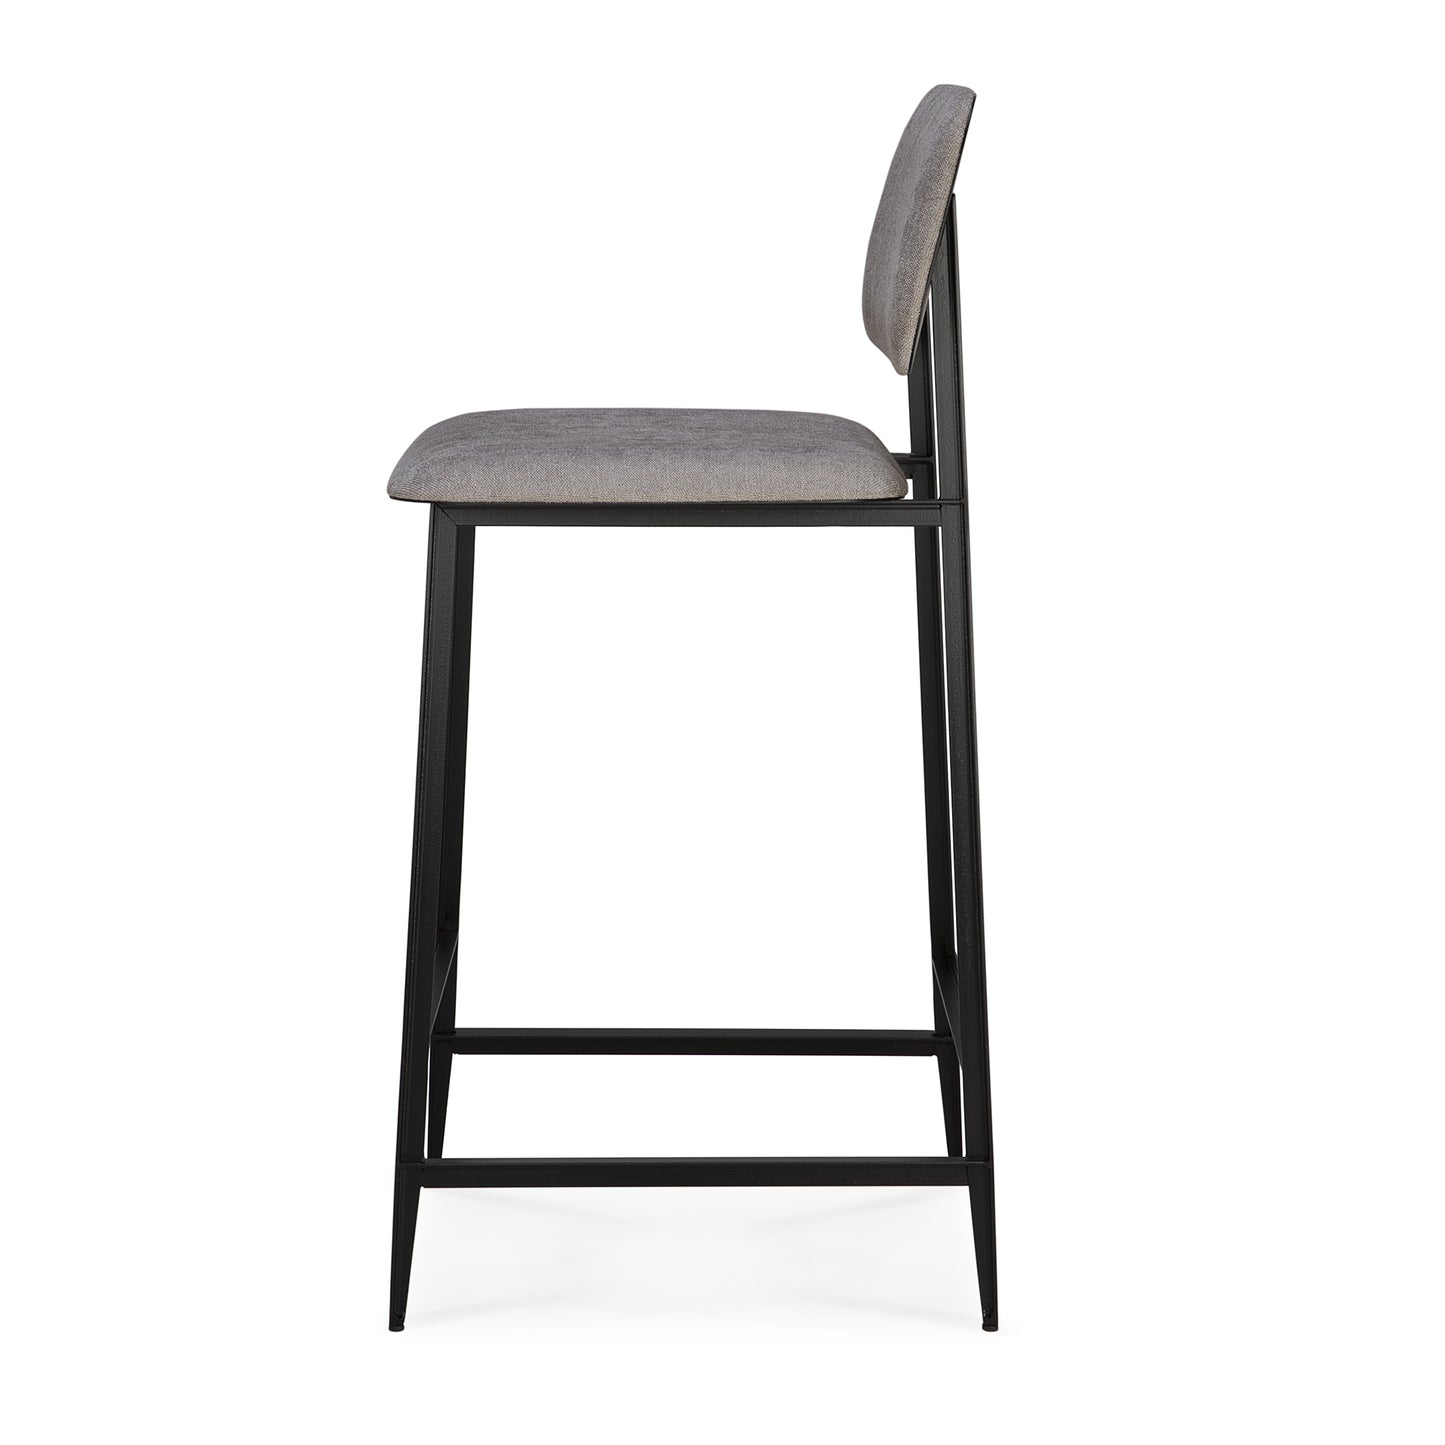 Ethnicraft DC Counter Bar Stool available from Make Your House A Home, Bendigo, Victoria, Australia